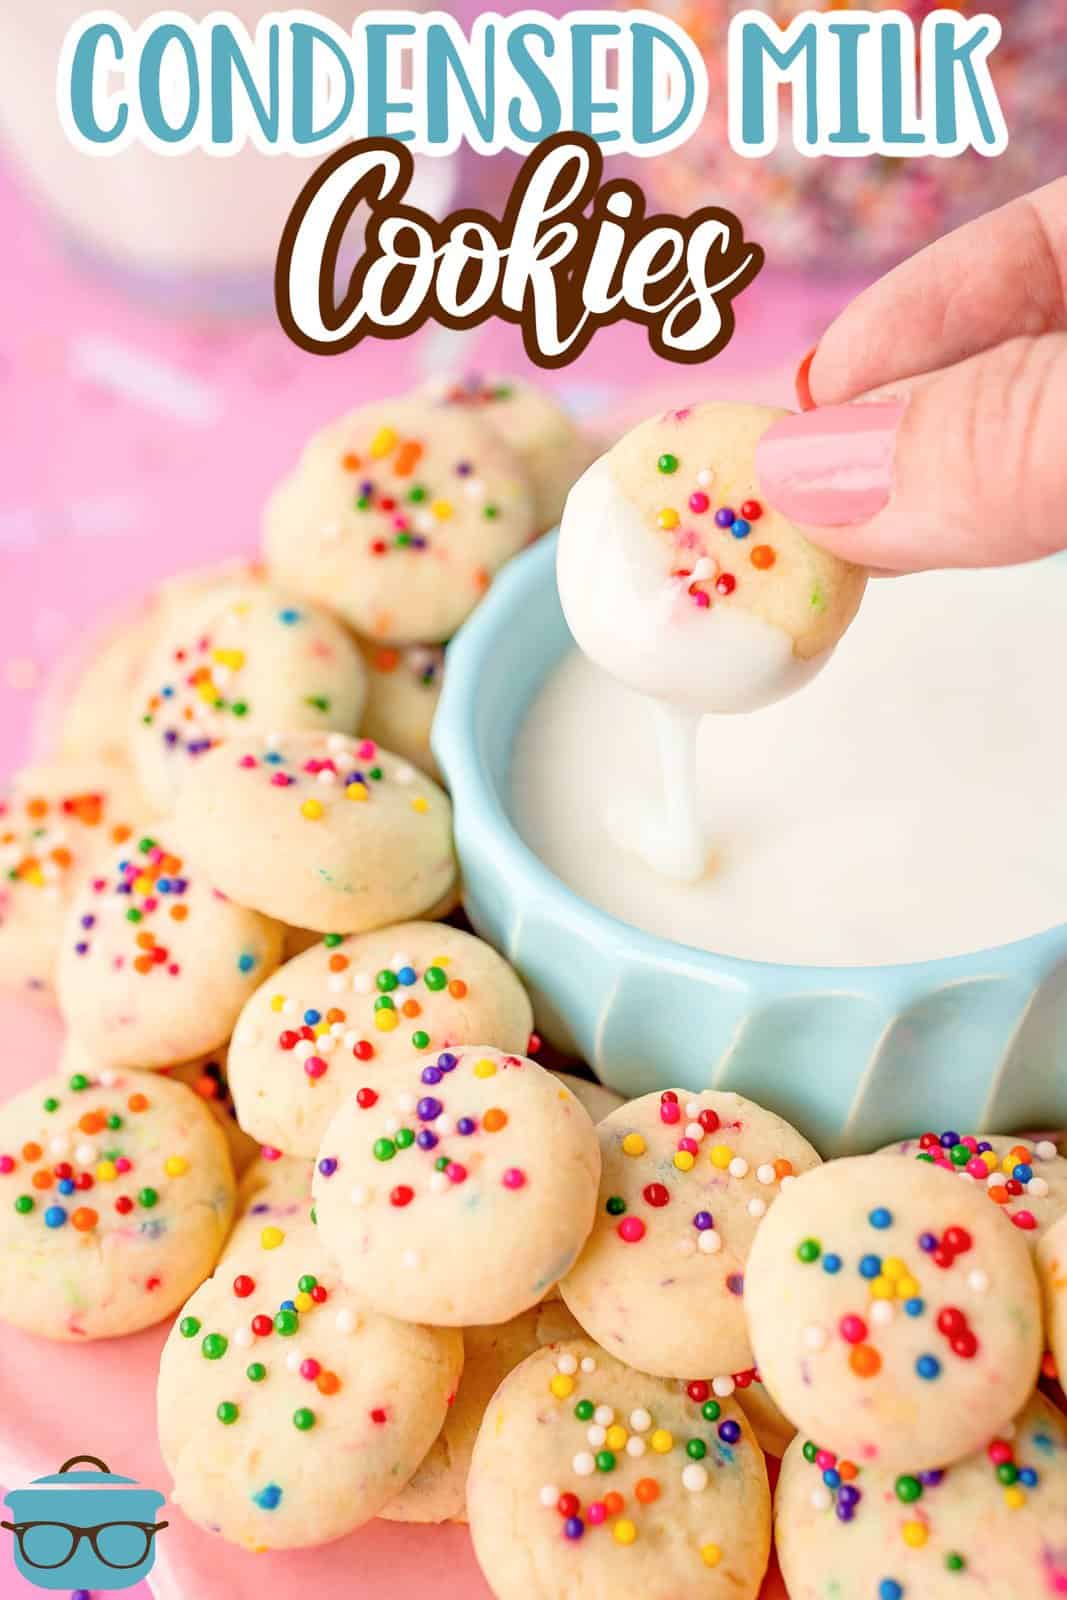 A hand dipping a cookie in a blue bowl of frosting.